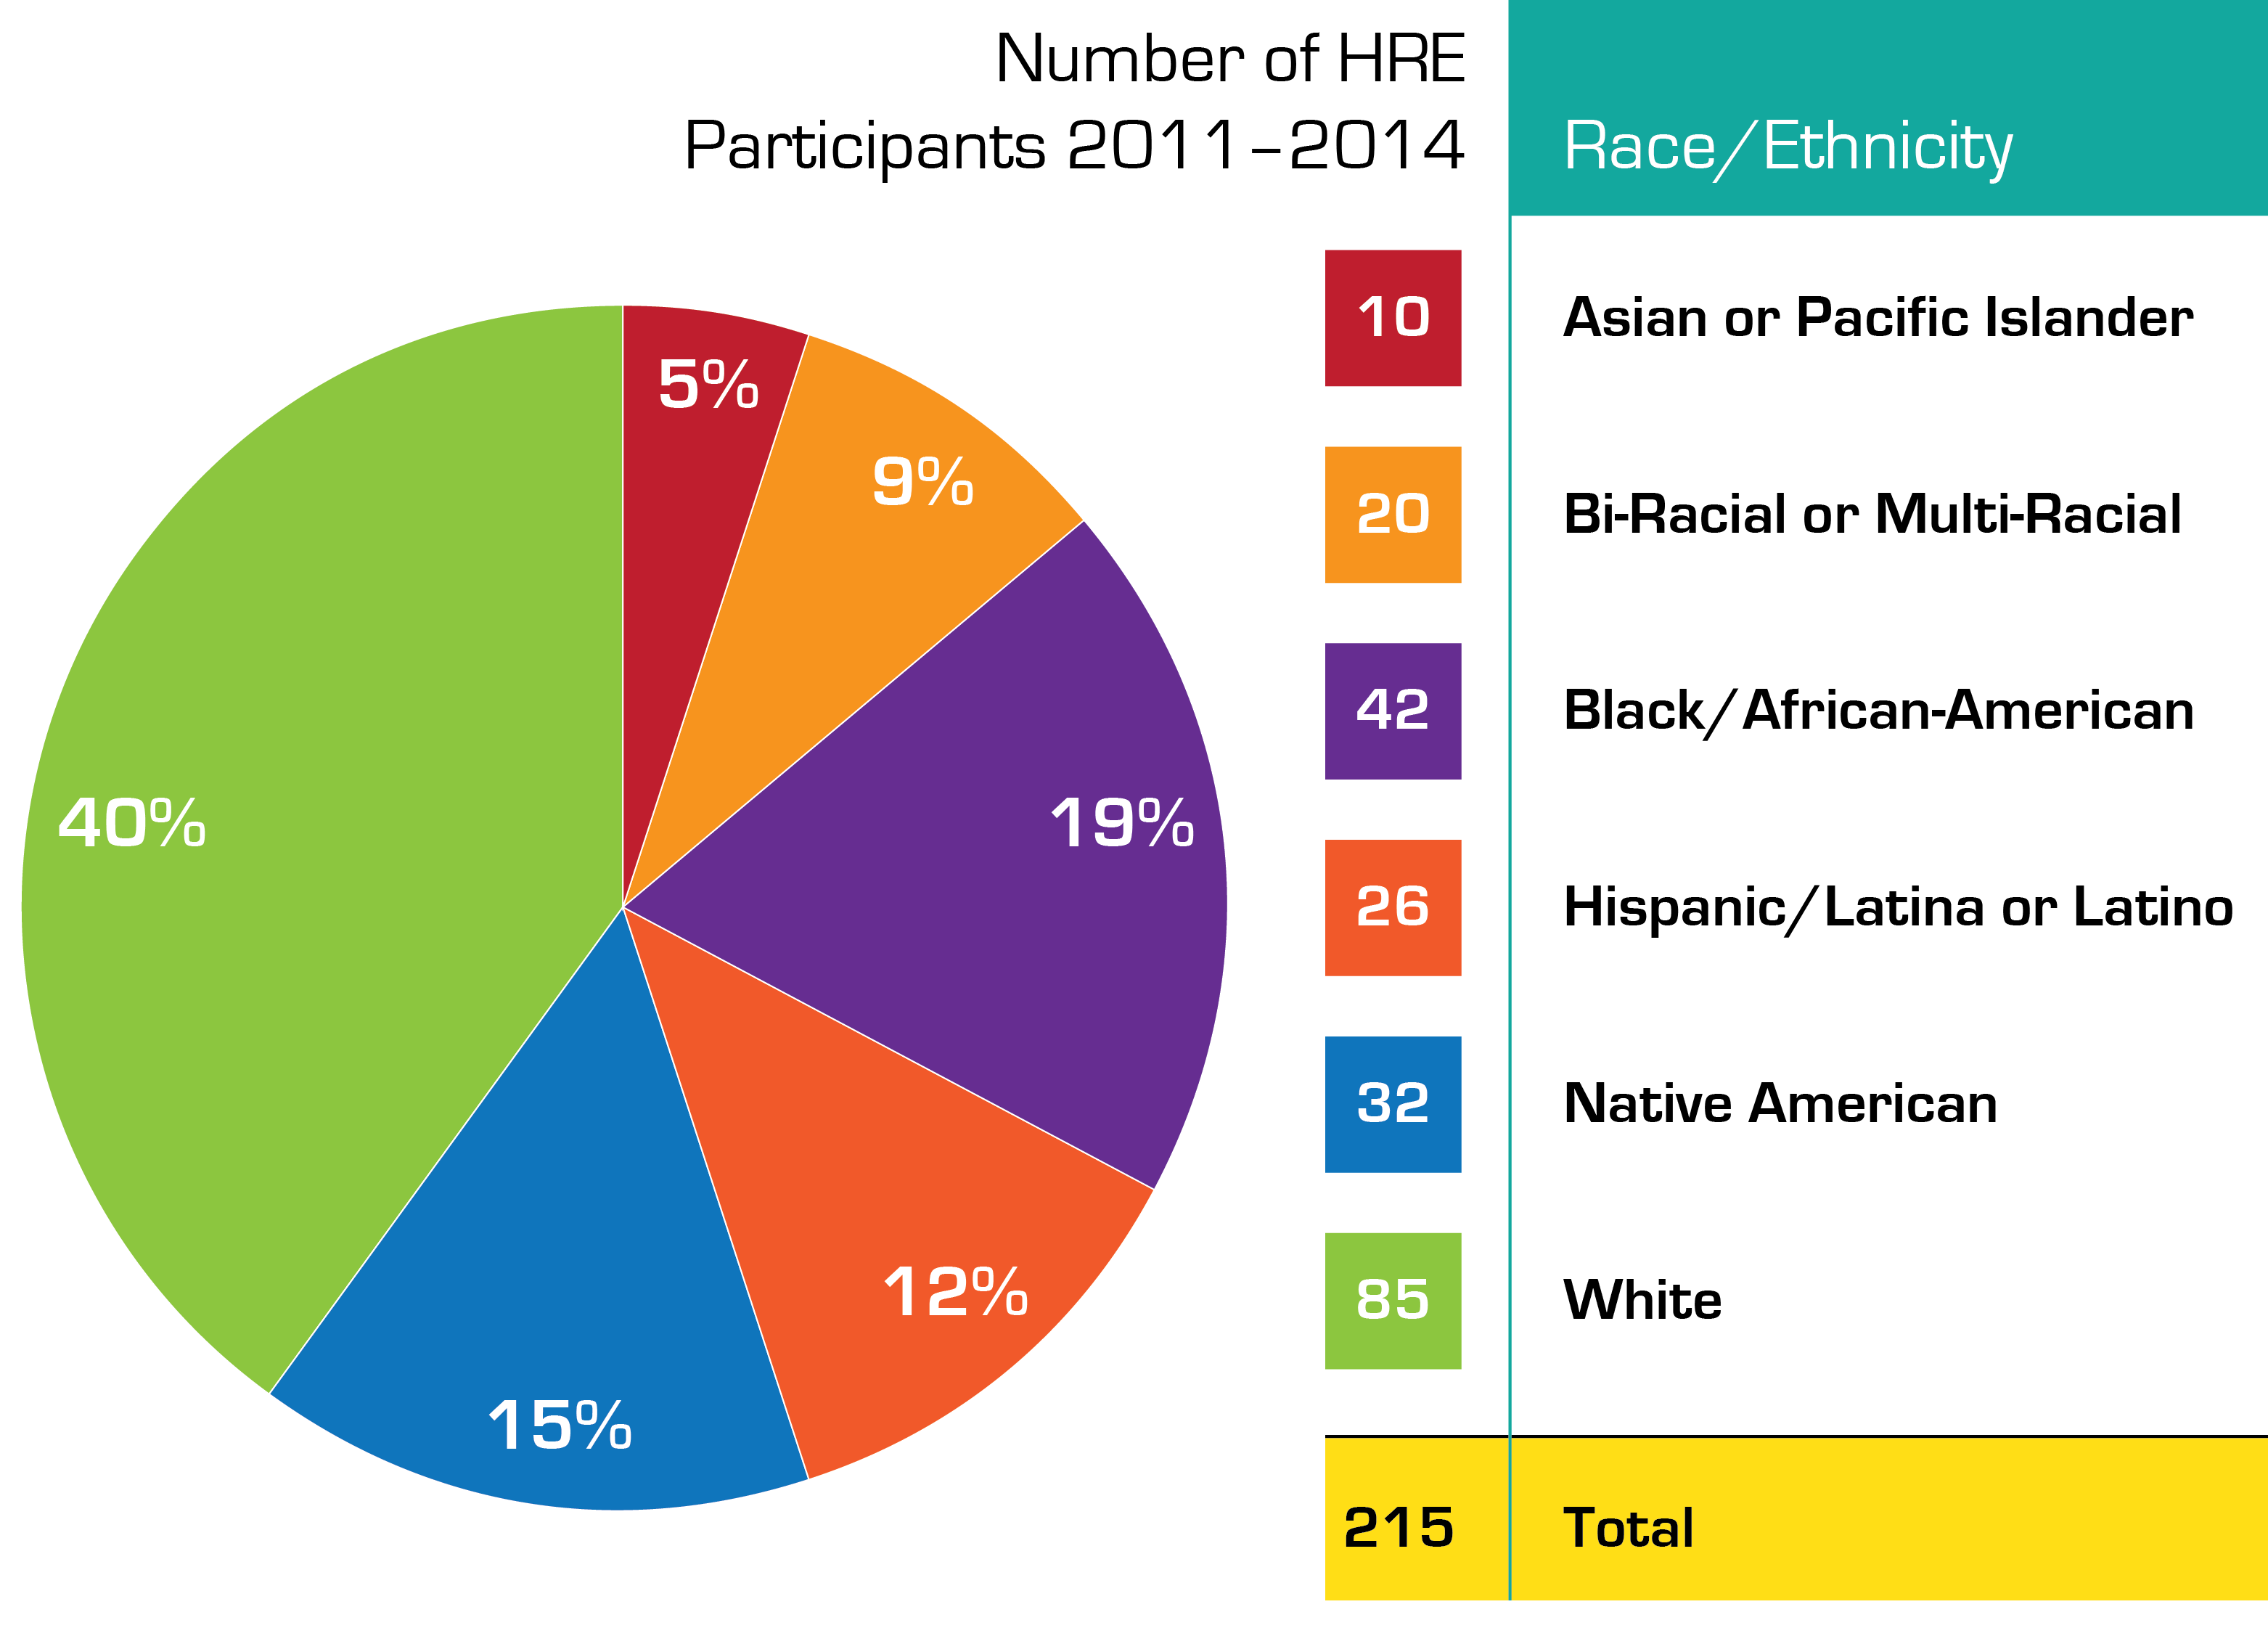 Self-Reported Race/Ethnicity of HRE Participants 2011–2014